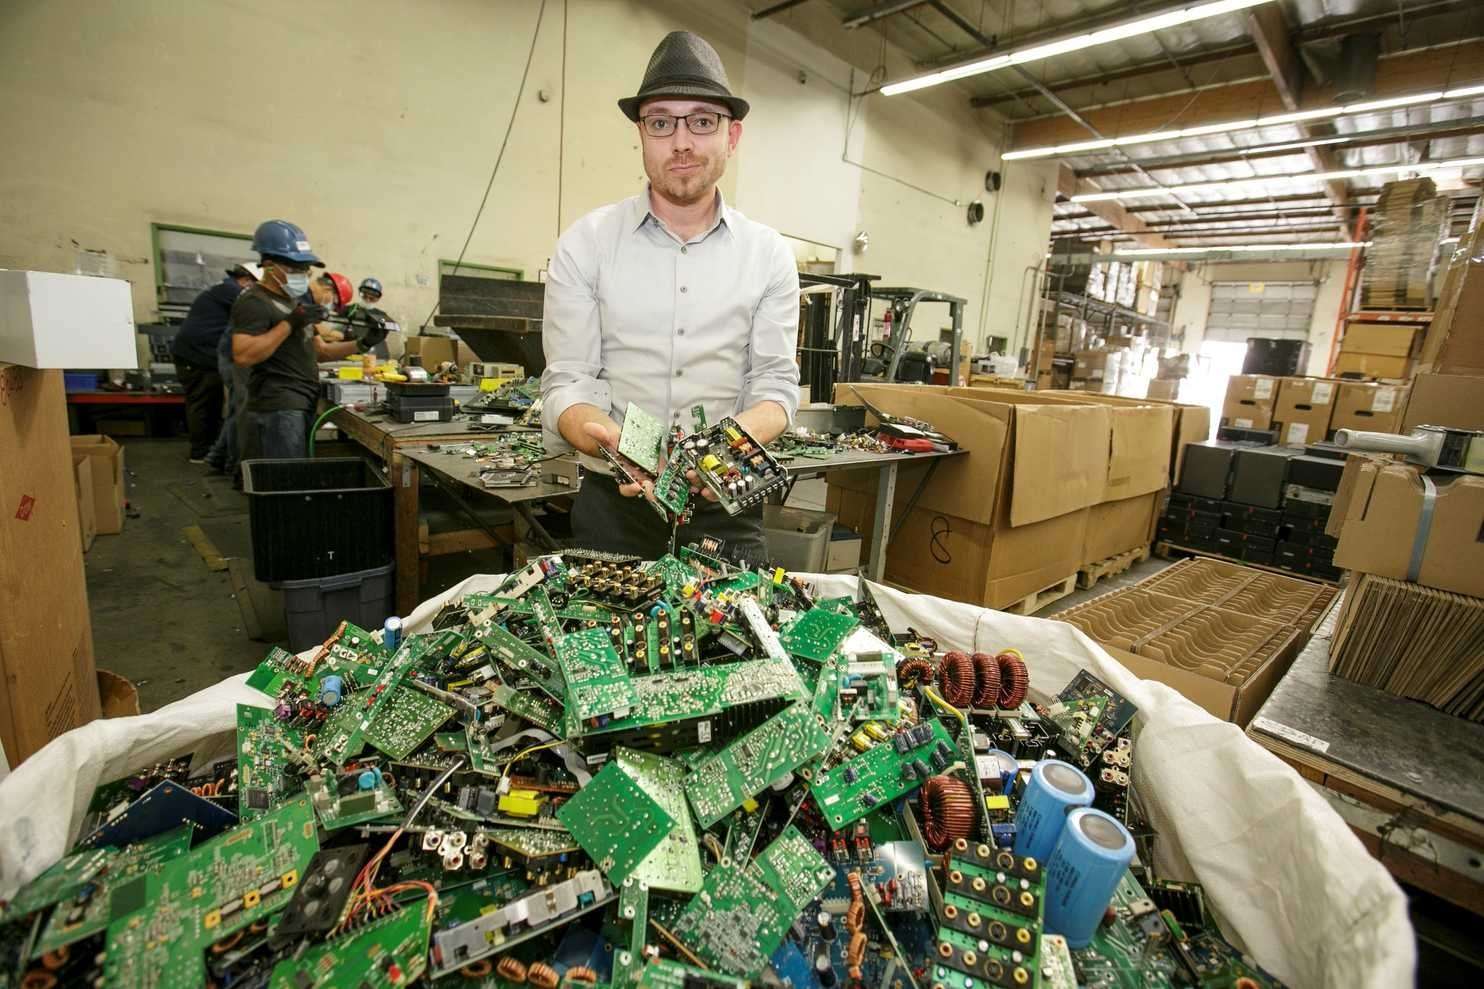 image for Eric Lundgren, ‘e-waste’ recycling innovator, faces prison for trying to extend life span of PCs